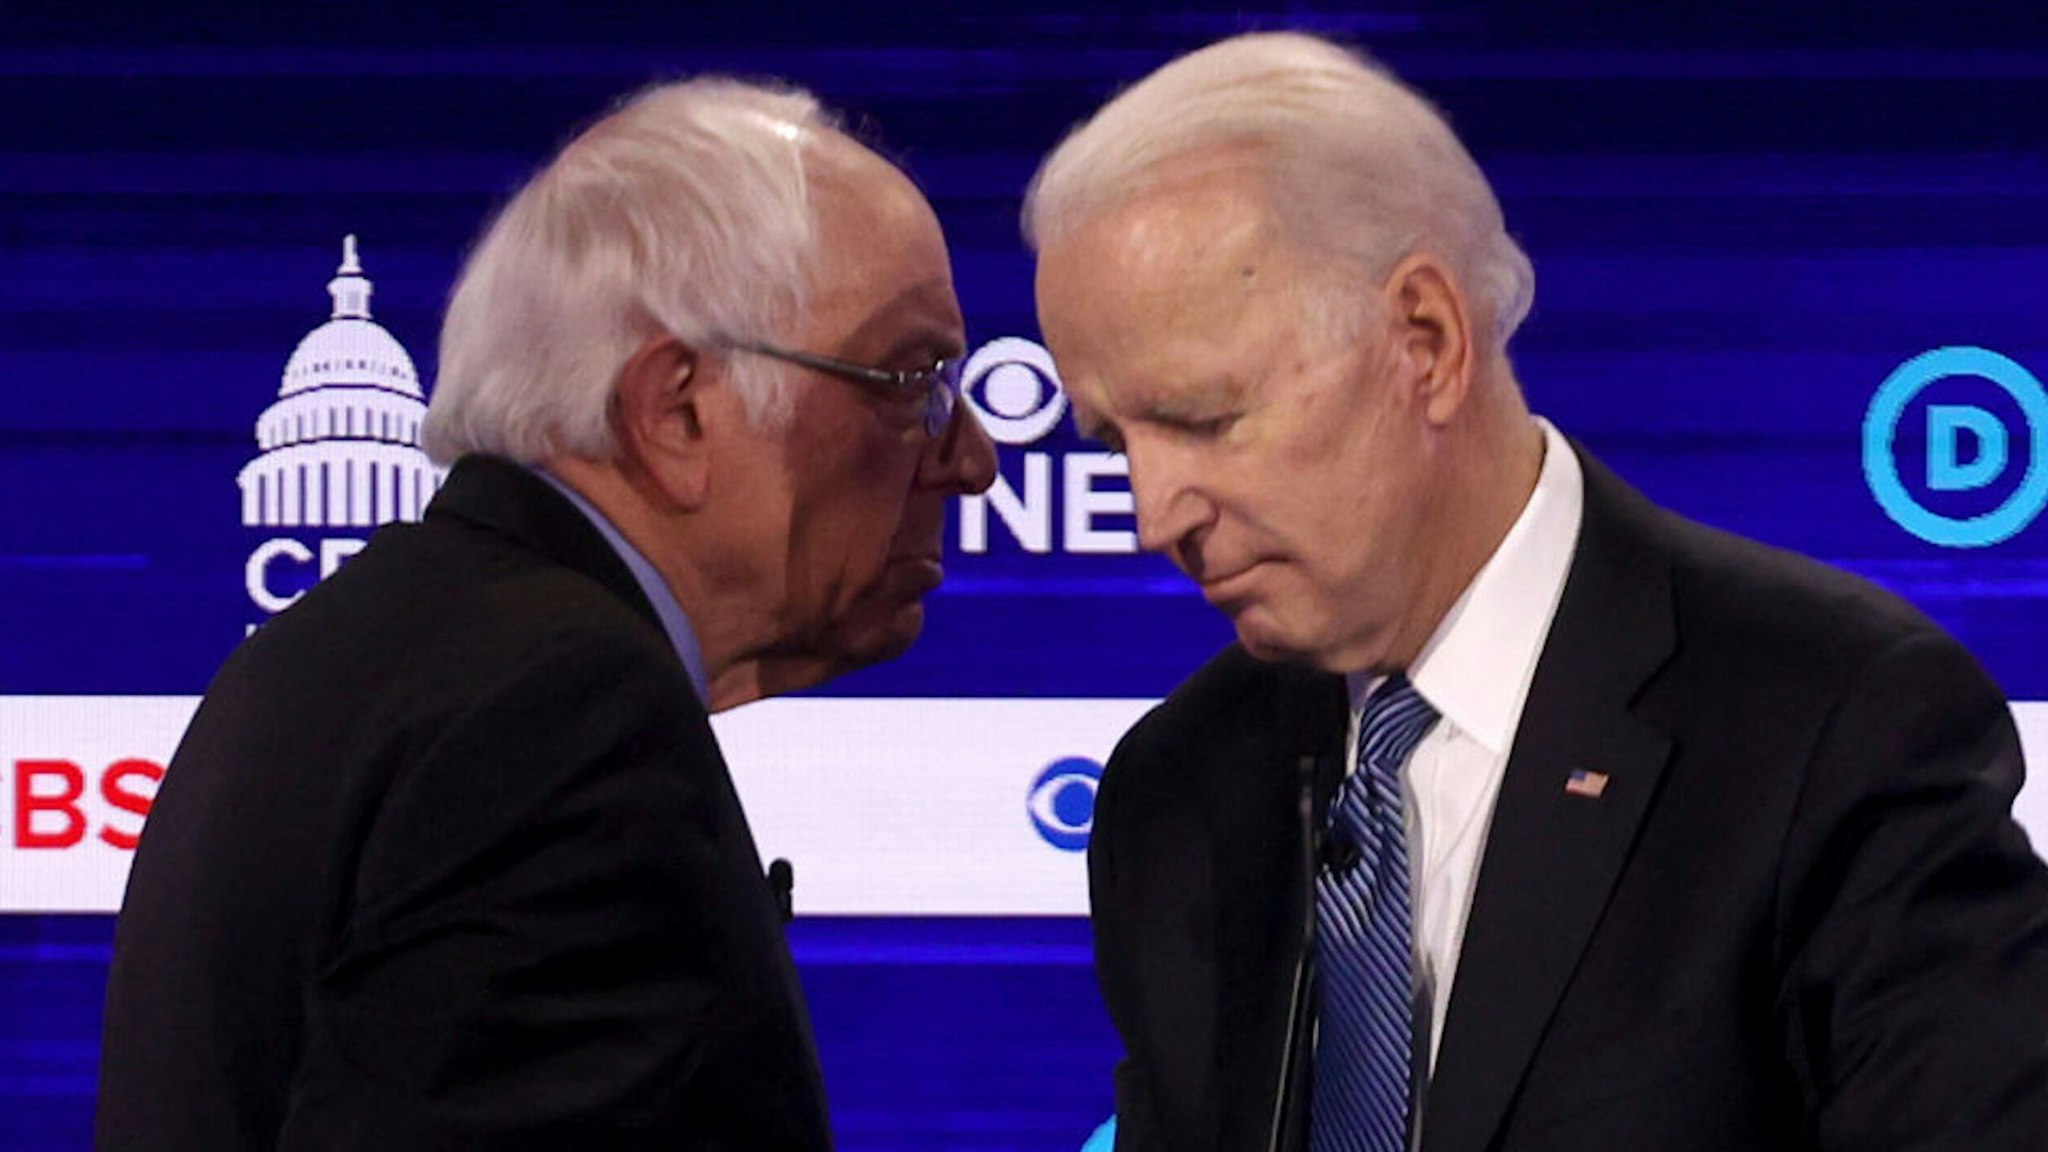 CHARLESTON, SOUTH CAROLINA - FEBRUARY 25: Democratic presidential candidates Sen. Bernie Sanders (I-VT) (L) and former Vice President Joe Biden speak during a break at the Democratic presidential primary debate at the Charleston Gaillard Center on February 25, 2020 in Charleston, South Carolina. Seven candidates qualified for the debate, hosted by CBS News and Congressional Black Caucus Institute, ahead of South Carolina‚Äôs primary in four days.